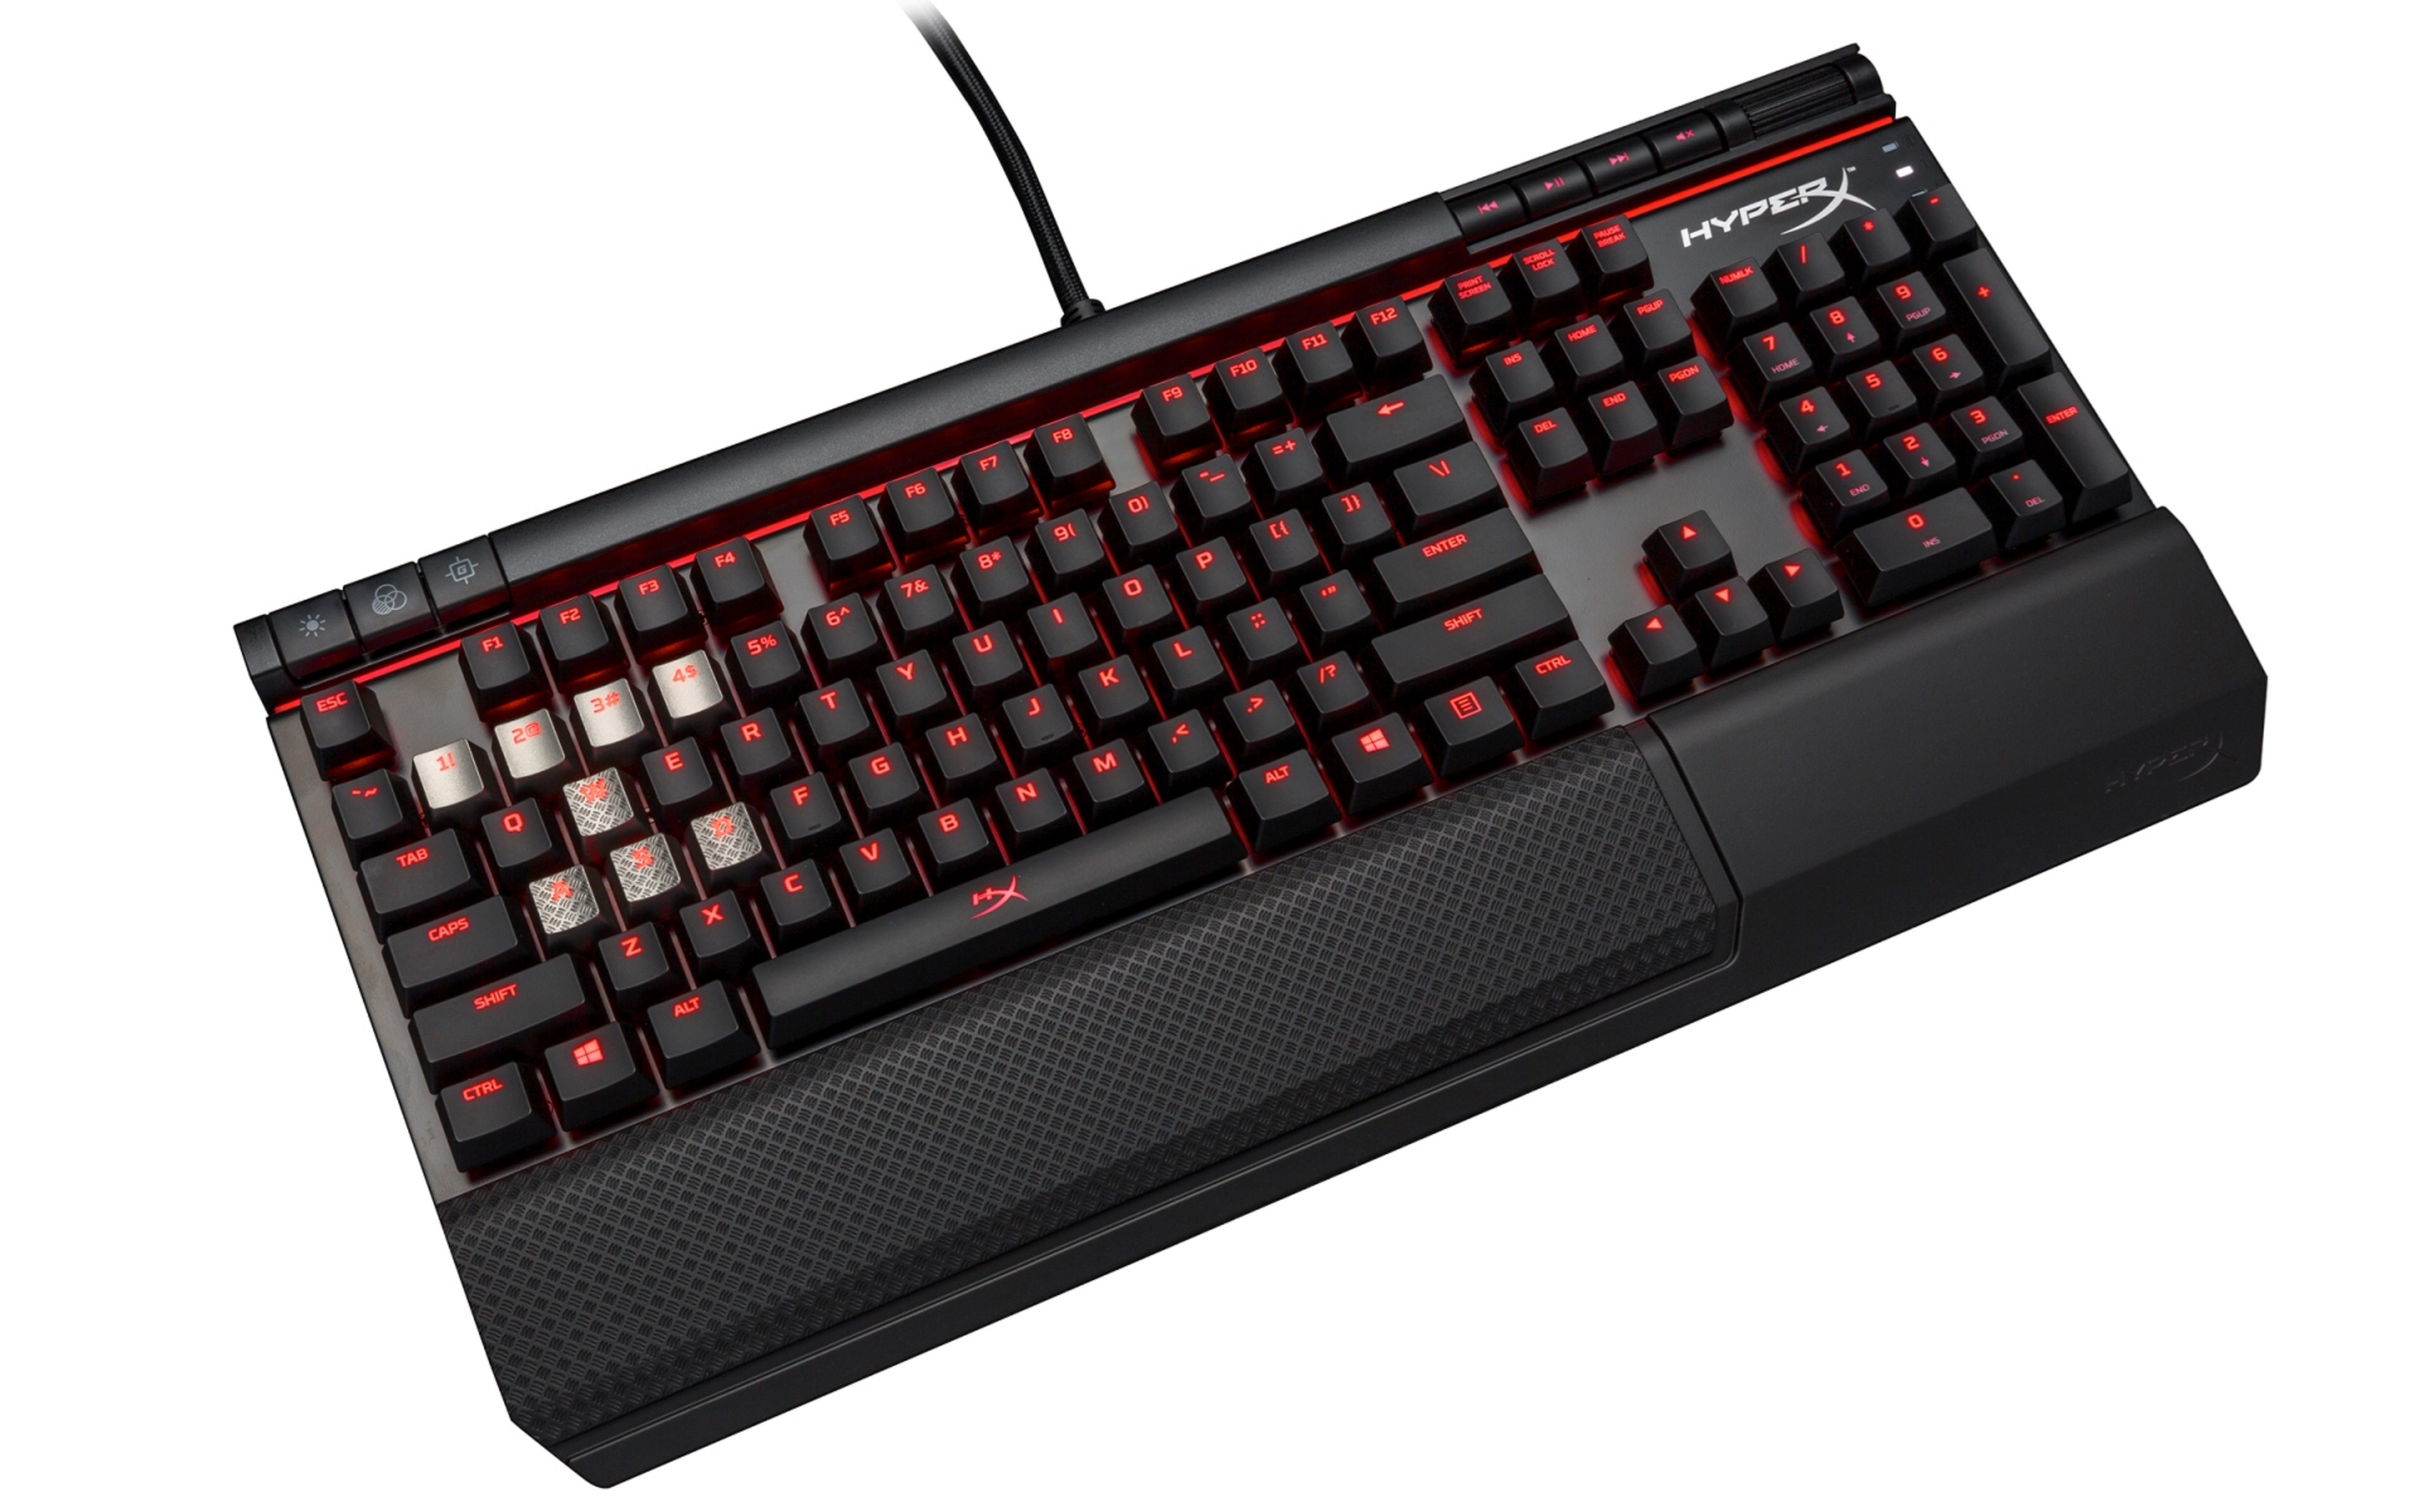 Diwali Gifting Ideas for the Gamers: HyperX